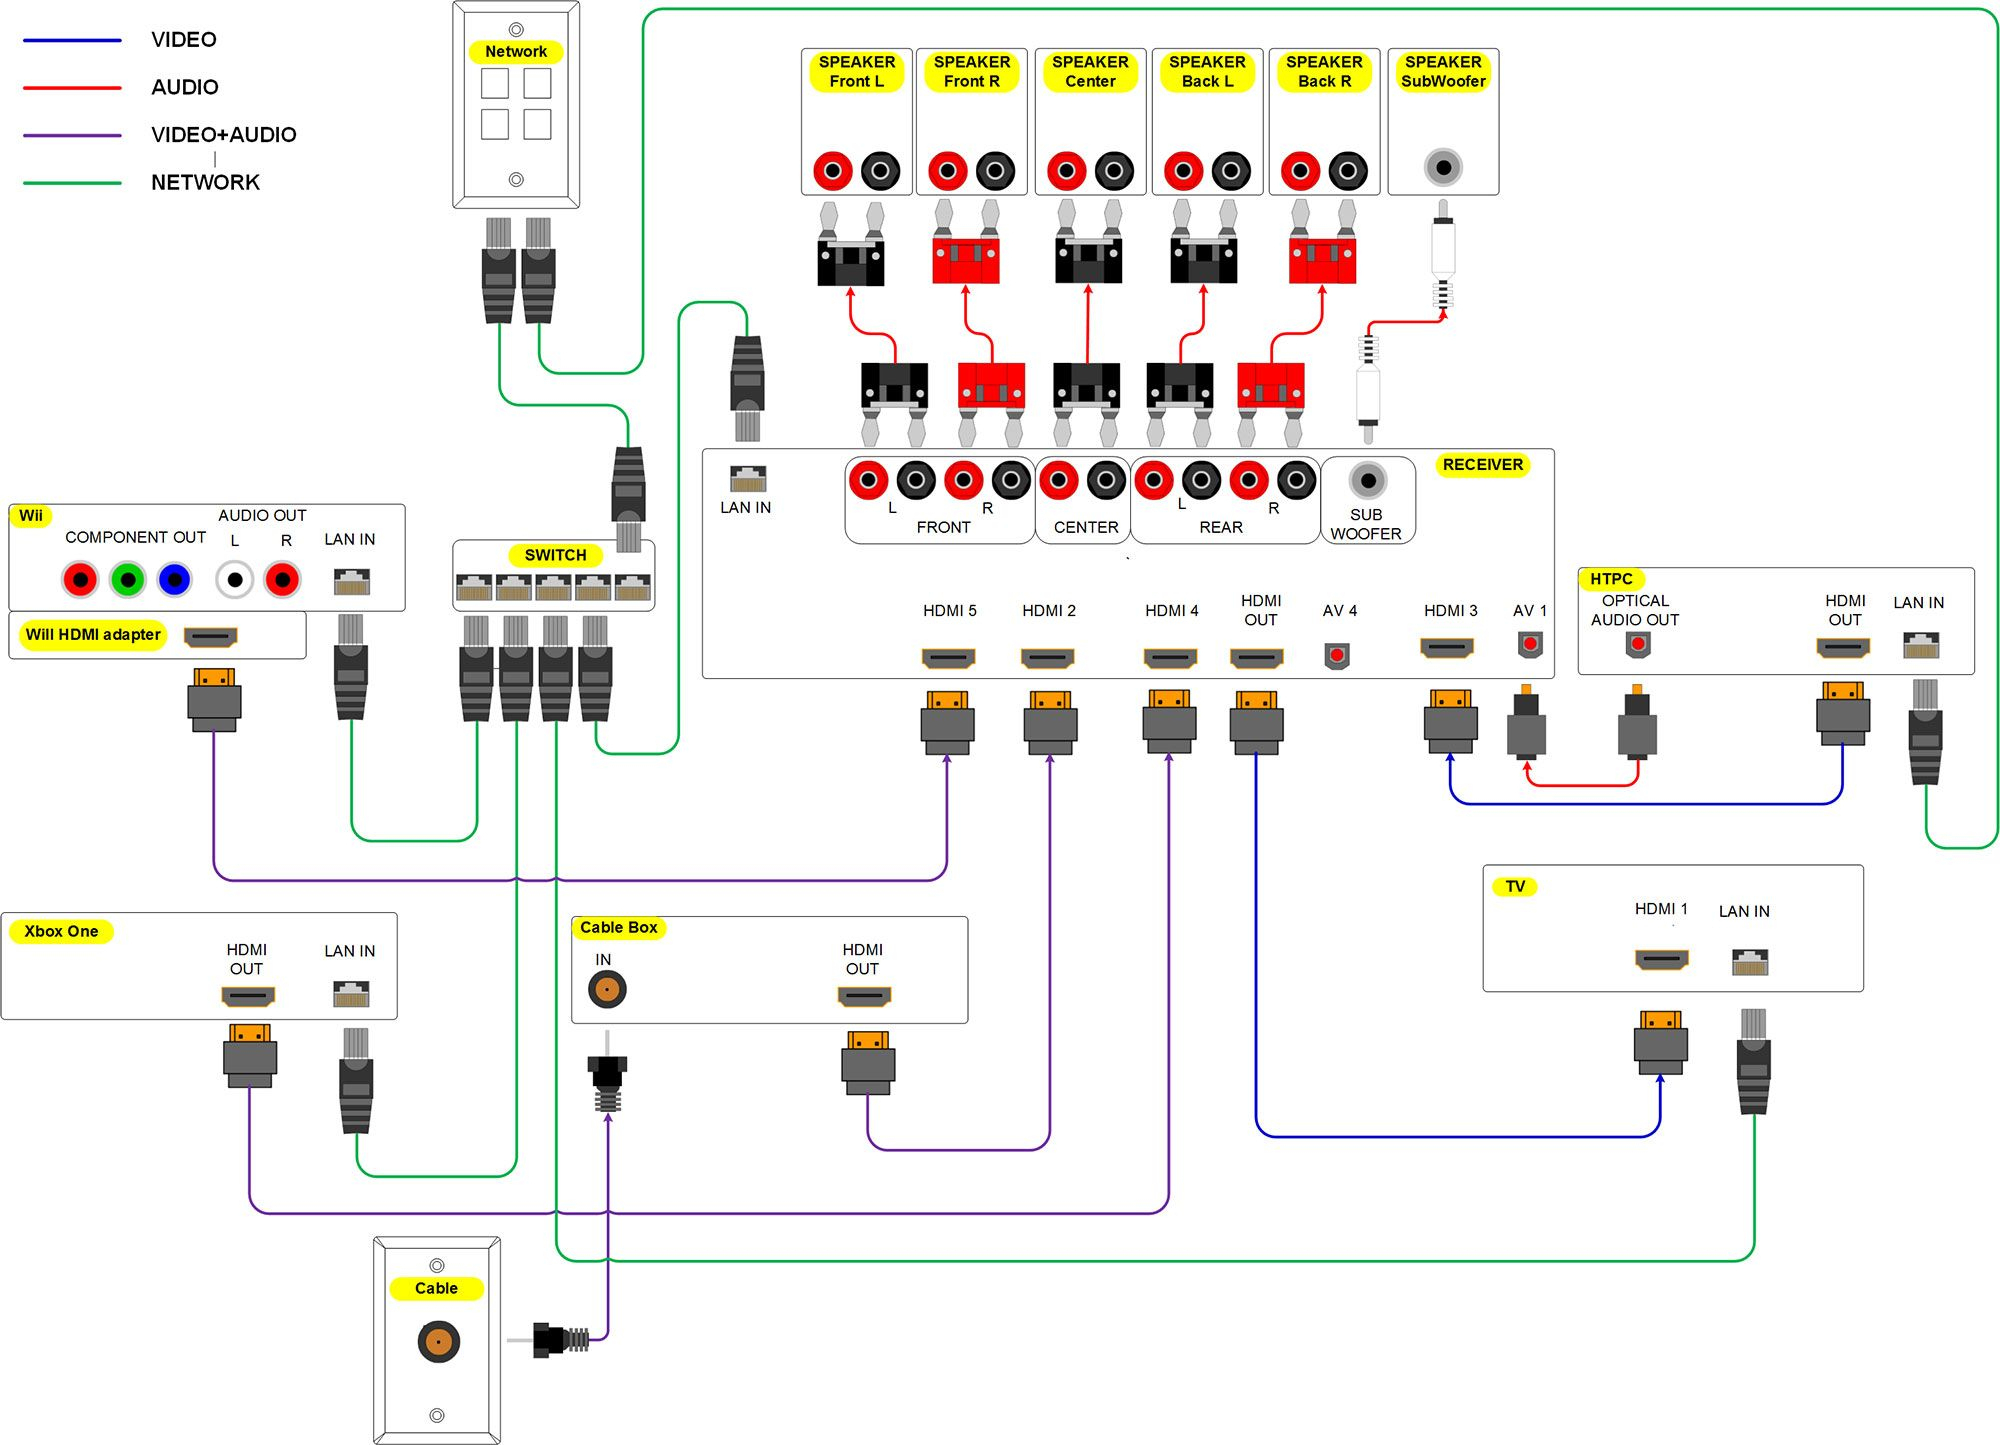 Home Theater Wiring Diagram | Home Cinema | Esquemas Electricos - Home Theater Wiring Diagram